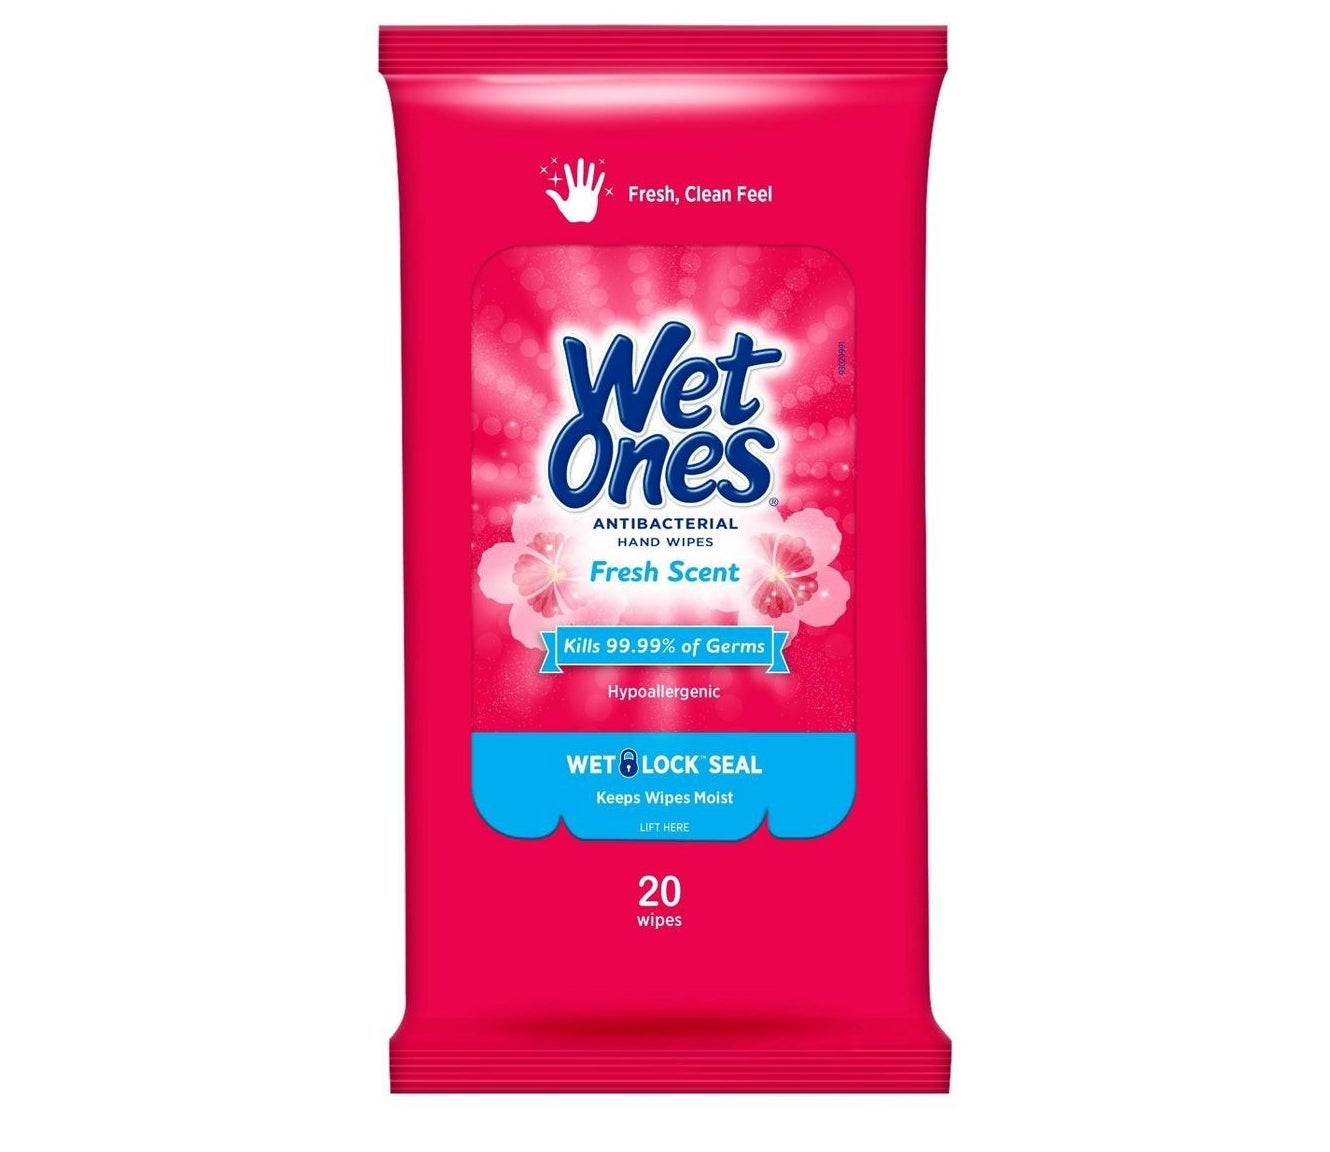 the pink package of wet wipes